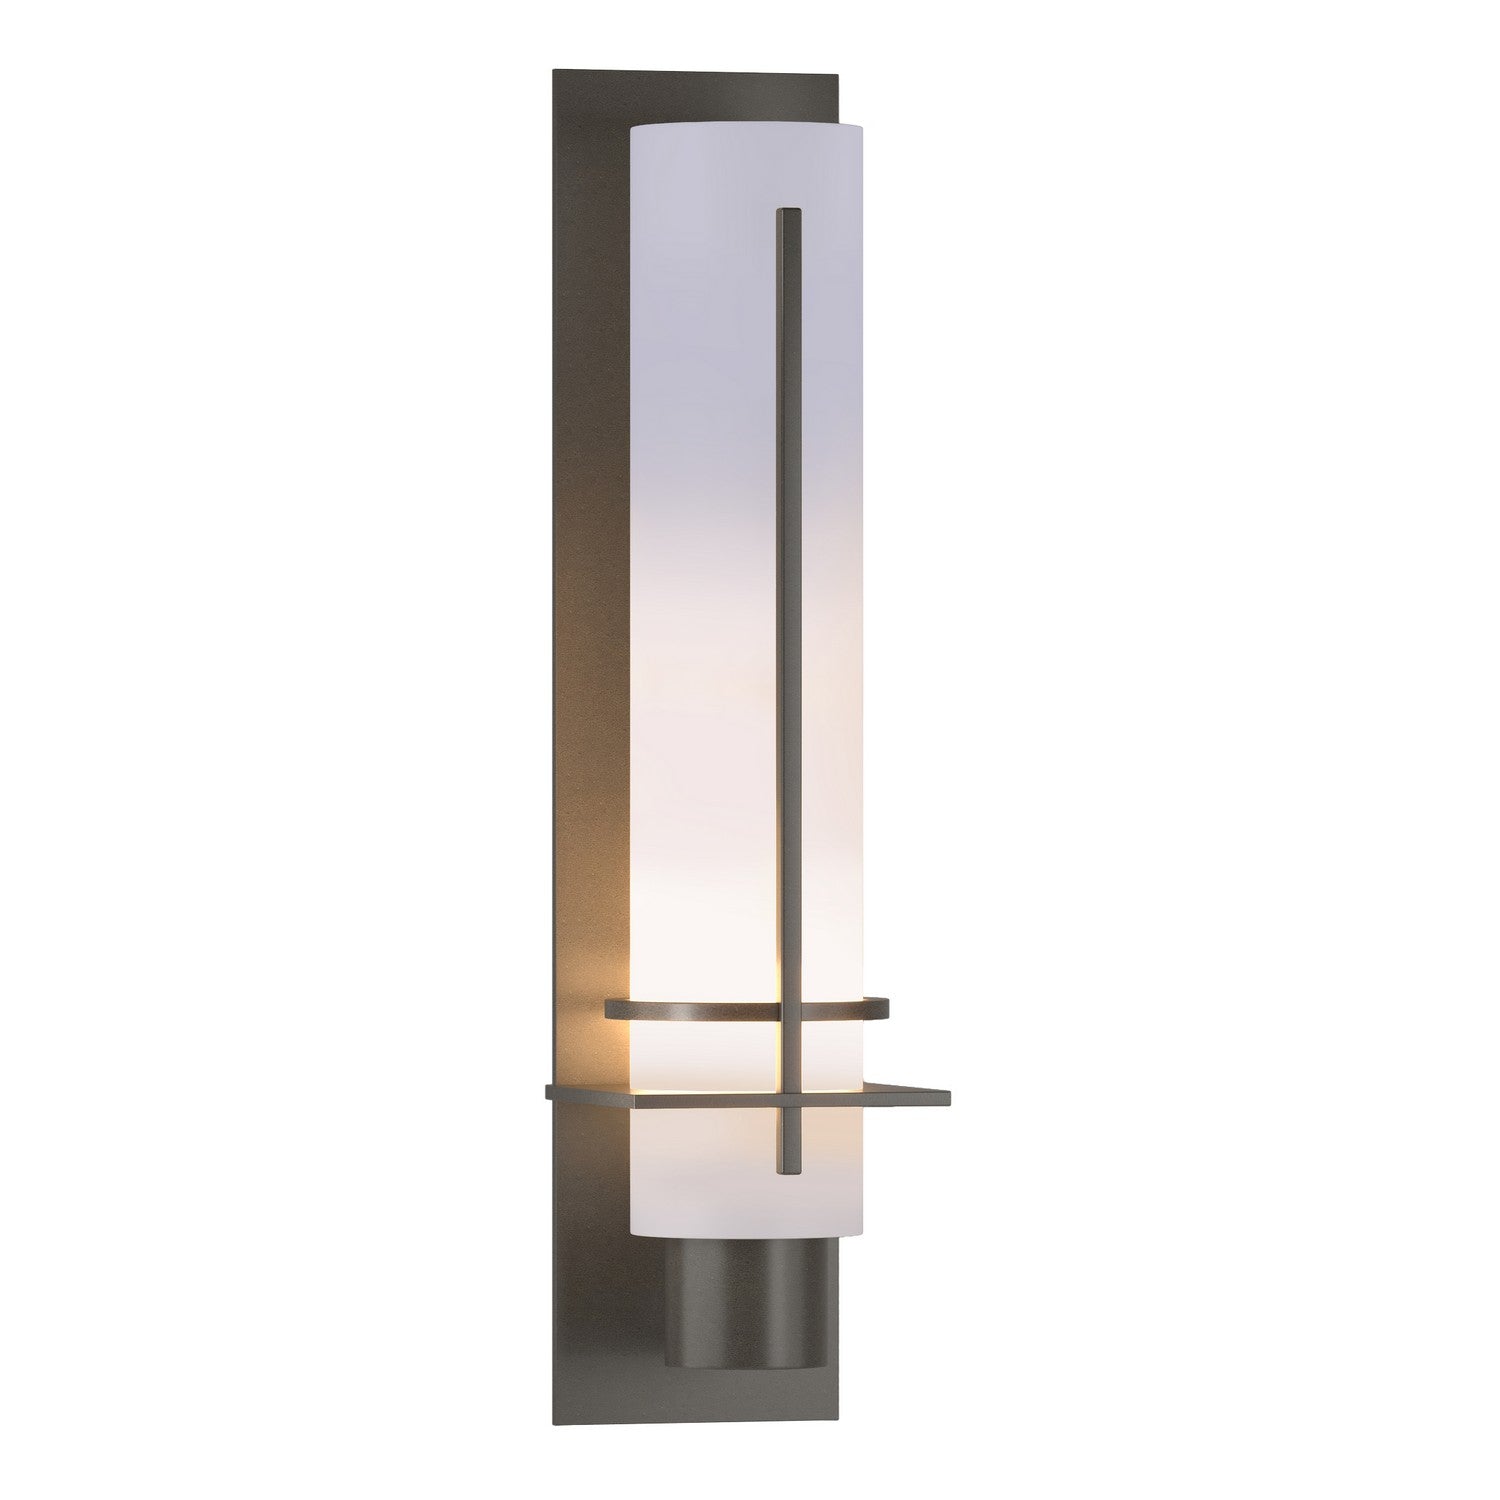 Hubbardton Forge - 207858-SKT-07-GG0173 - One Light Wall Sconce - After Hours - Dark Smoke